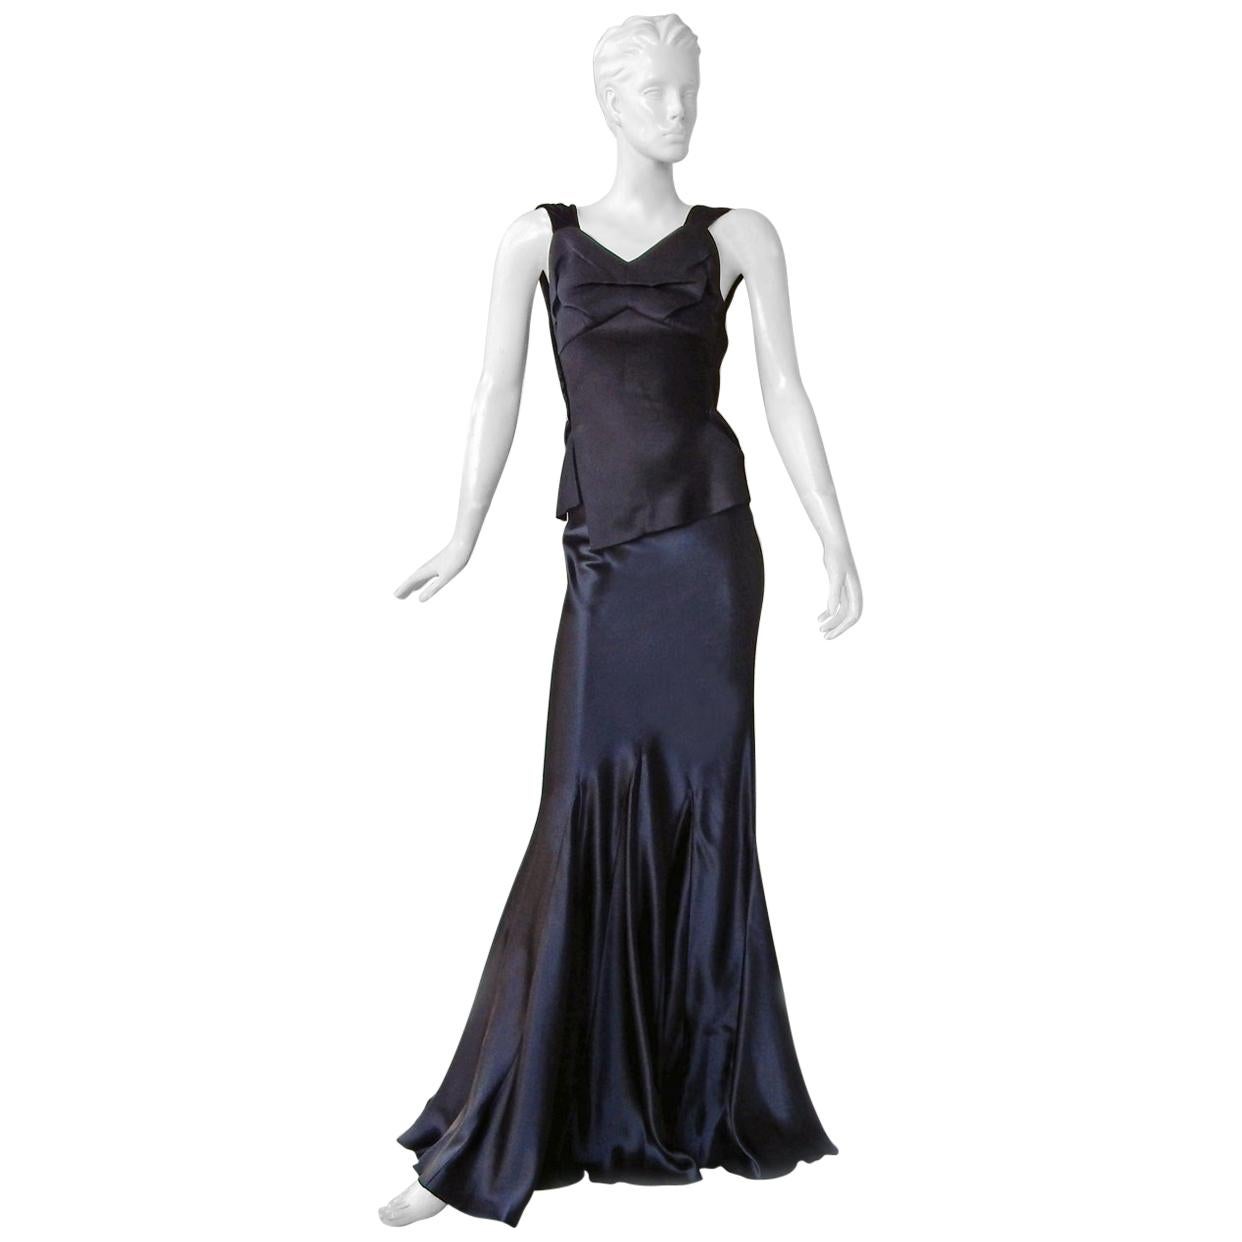 Maison Margiela Black Orchid Bias Gown with Open Back  New! For Sale